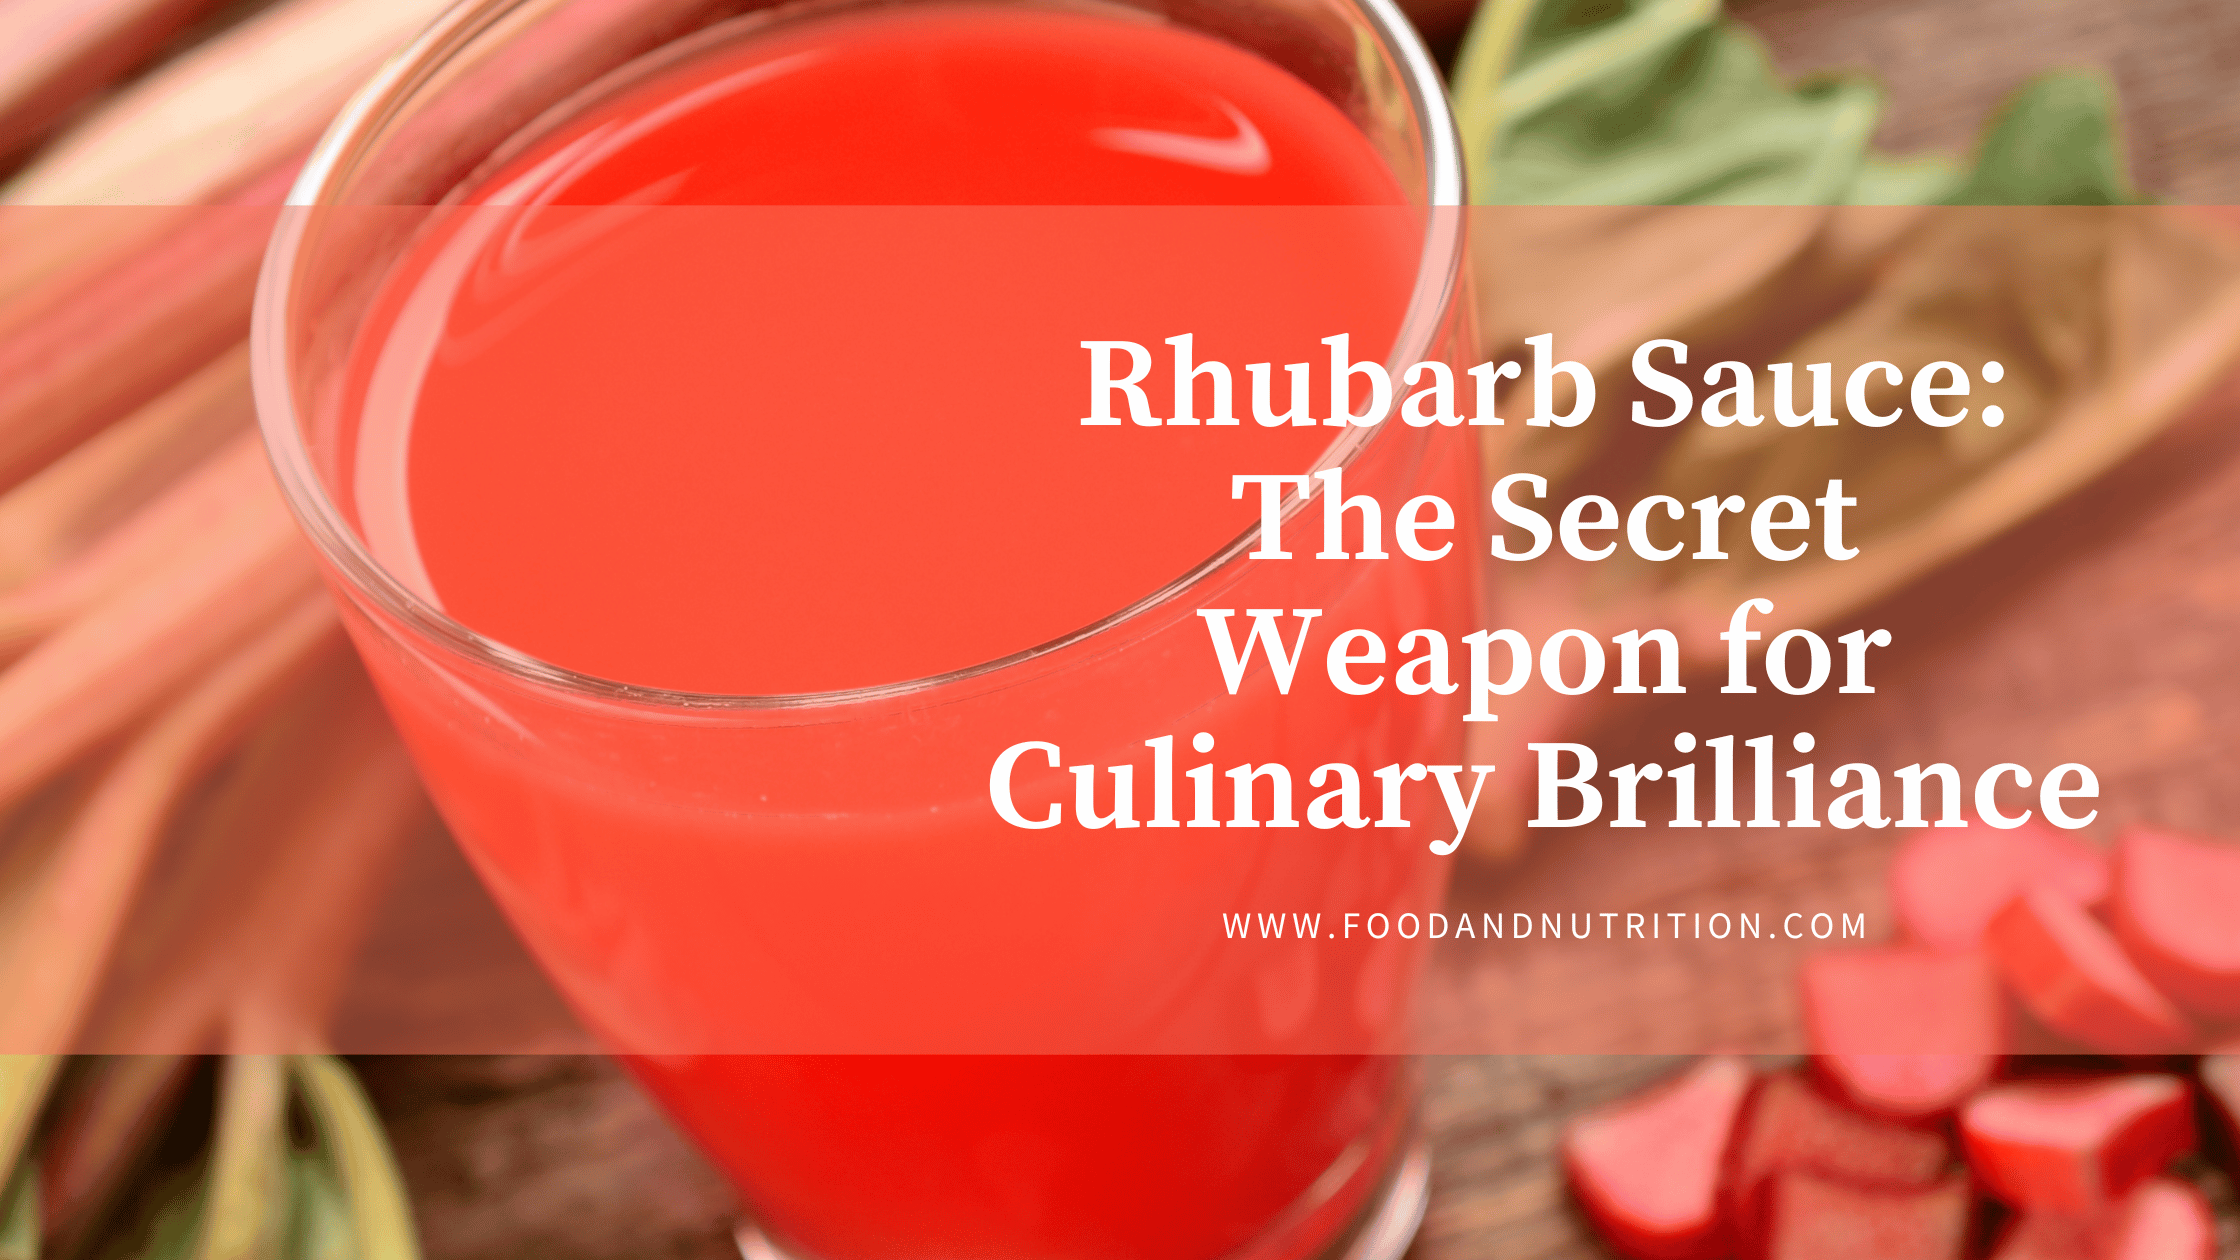 Rhubarb Sauce: The Secret Weapon for Culinary Brilliance